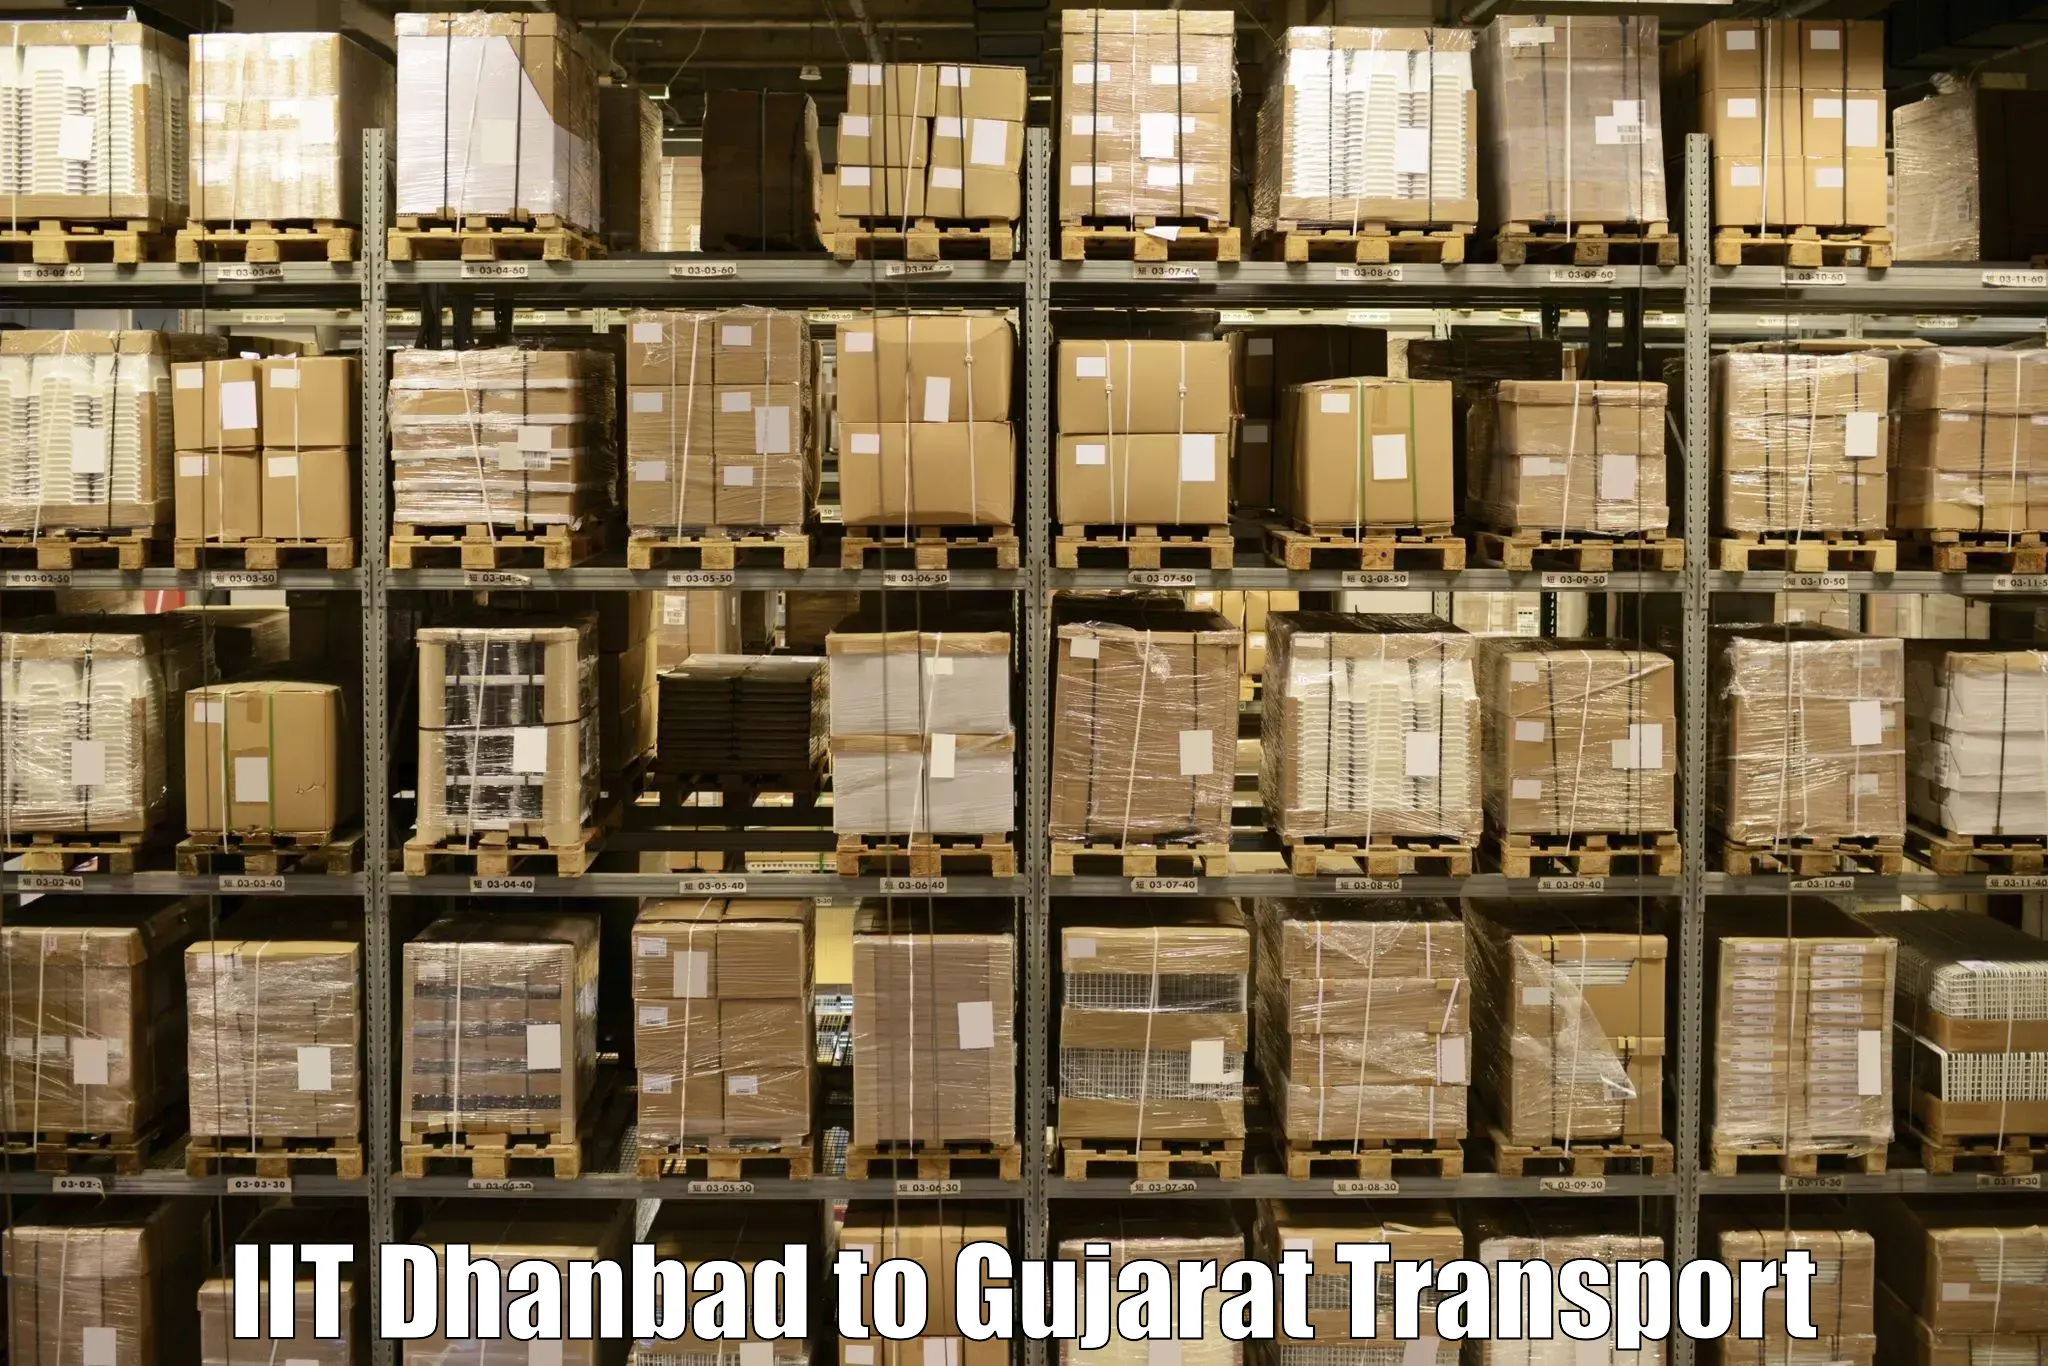 Nearby transport service IIT Dhanbad to Dharmasala